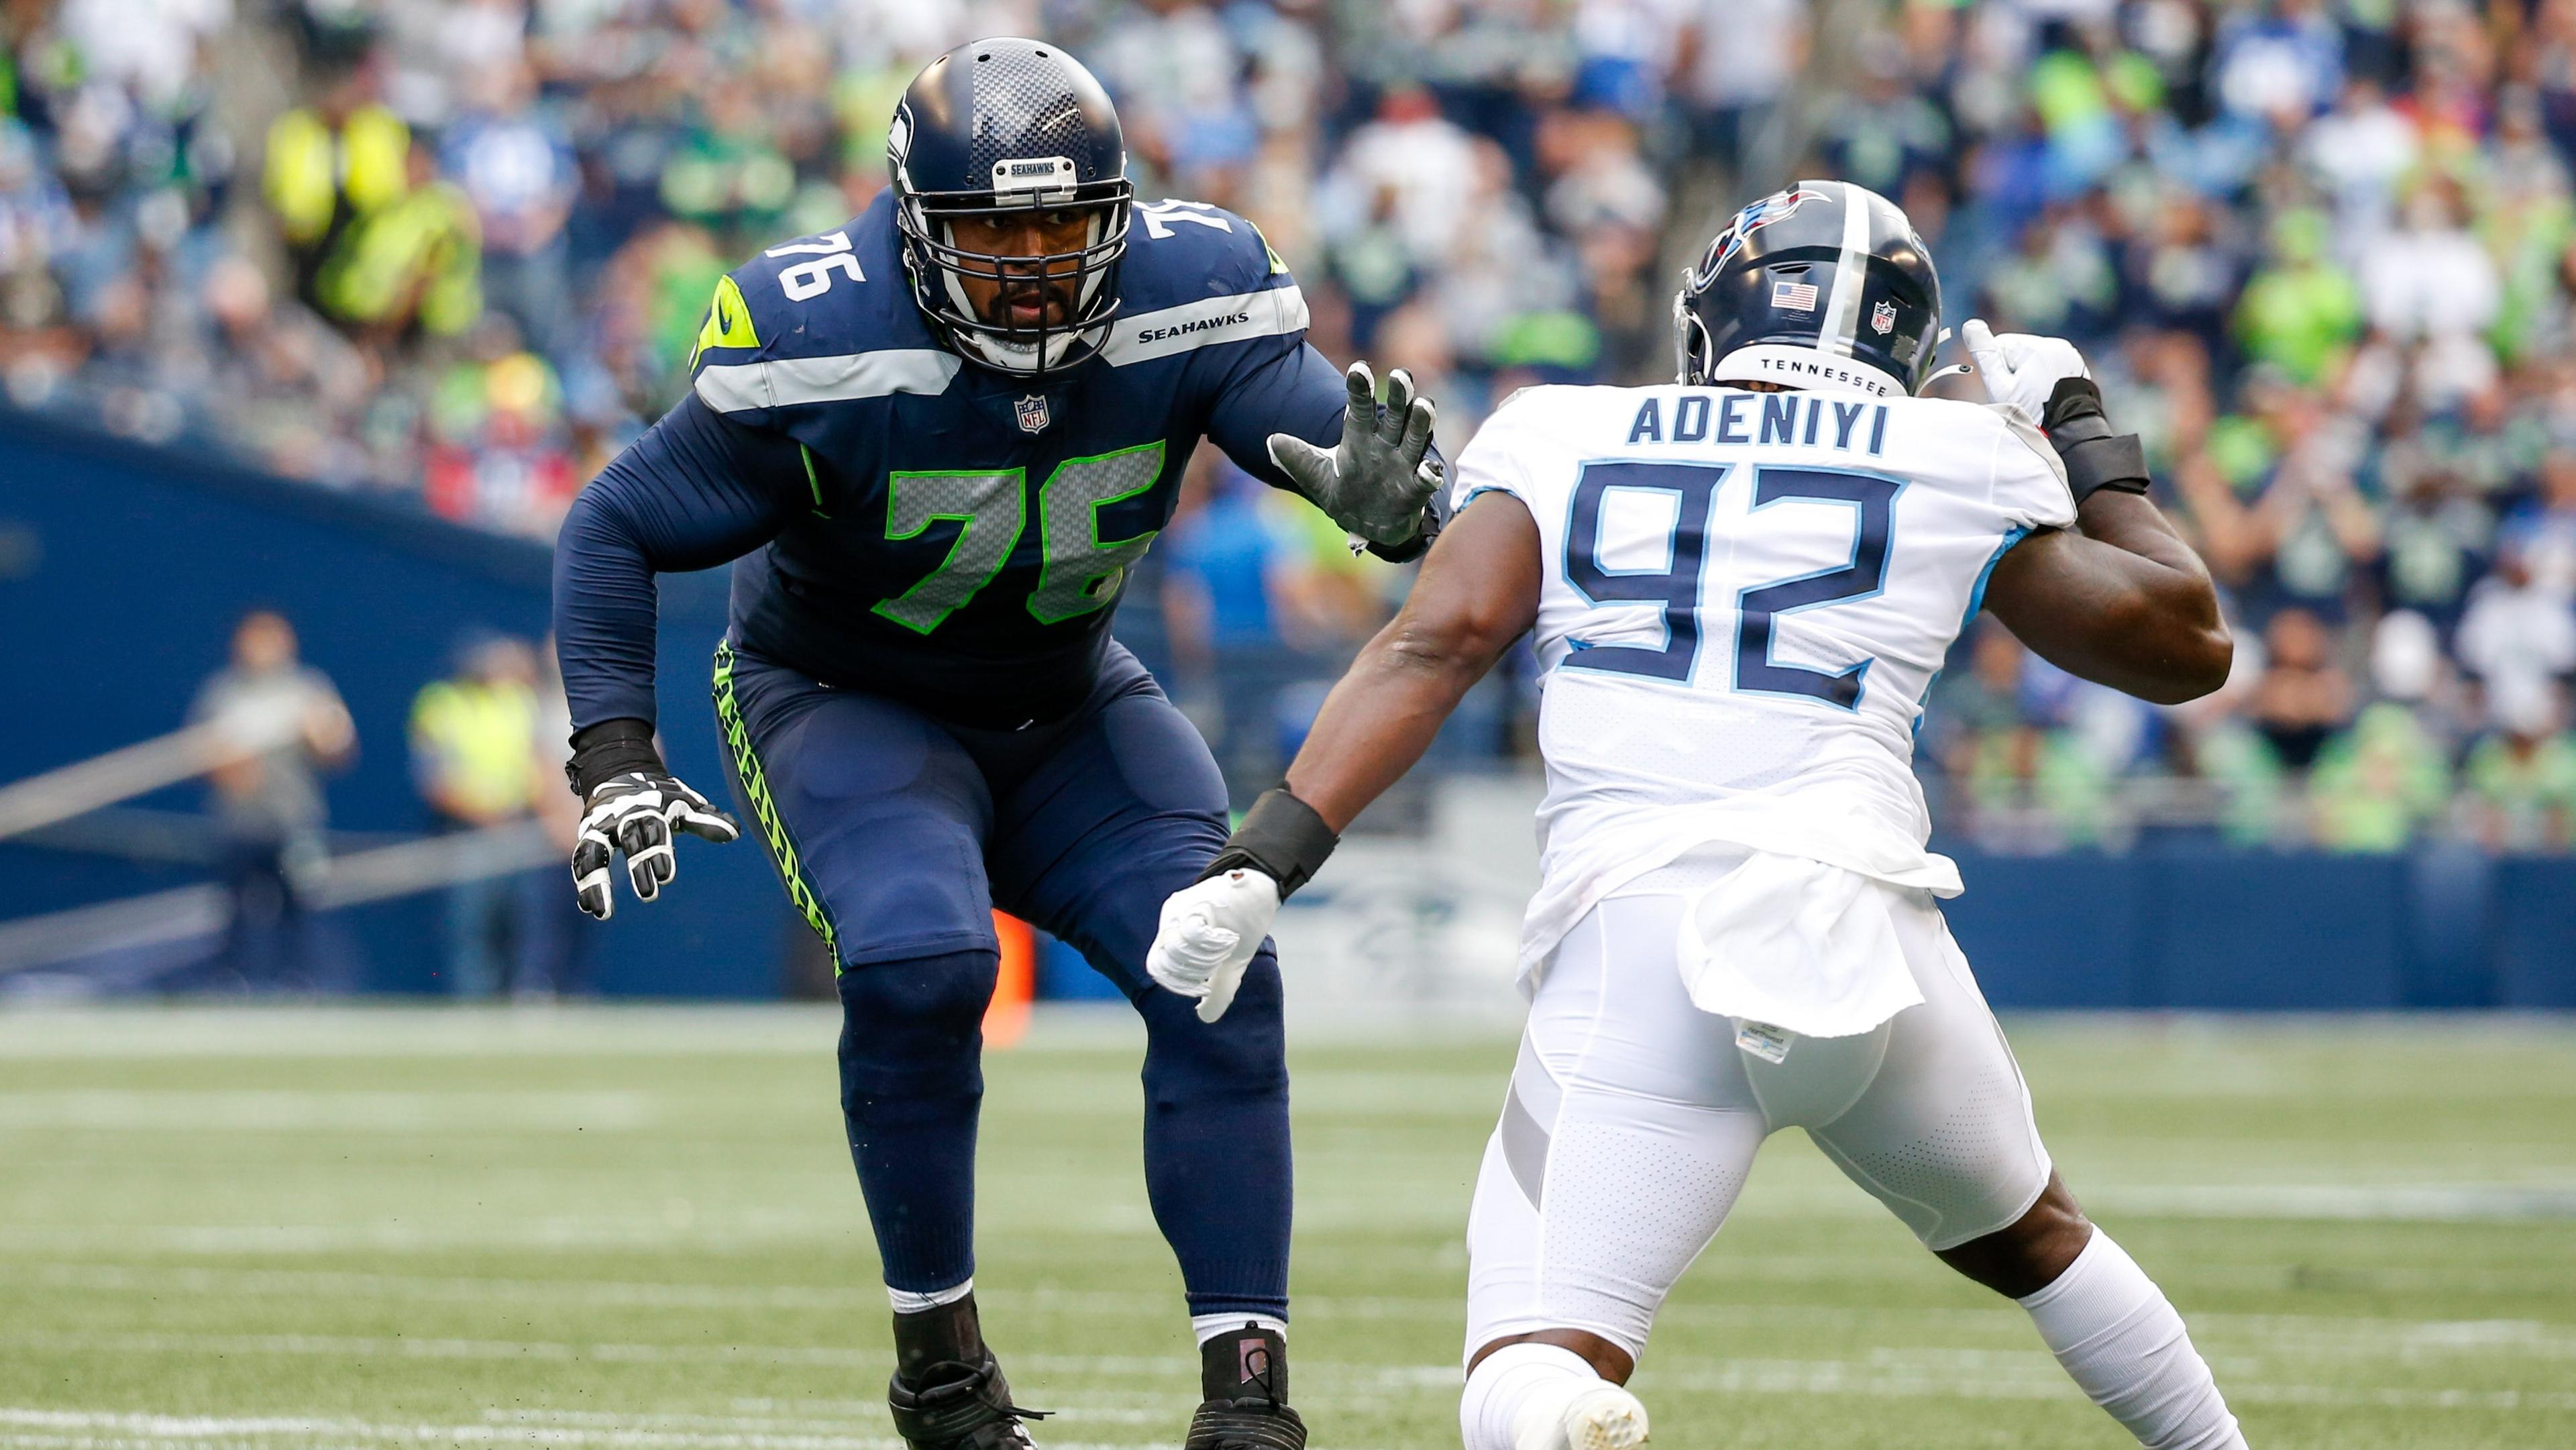 Seattle Seahawks offensive tackle Duane Brown (76) blocks against the Tennessee Titans during the second quarter at Lumen Field. / Joe Nicholson - USA TODAY Sports